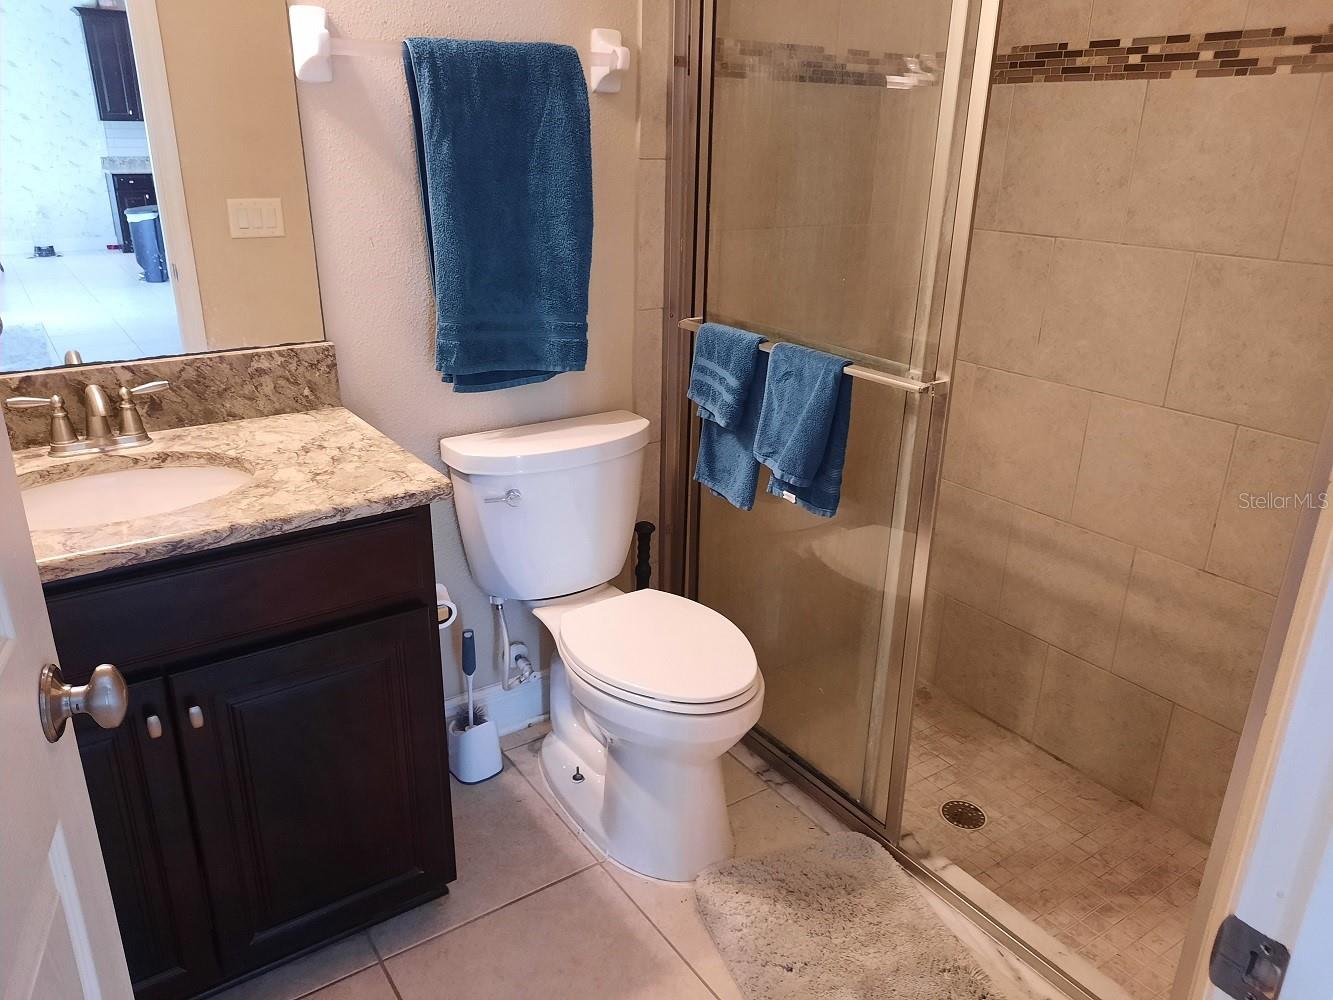 Full Downstairs Bath With Same Quartz Counter & Hardwood Cabinet